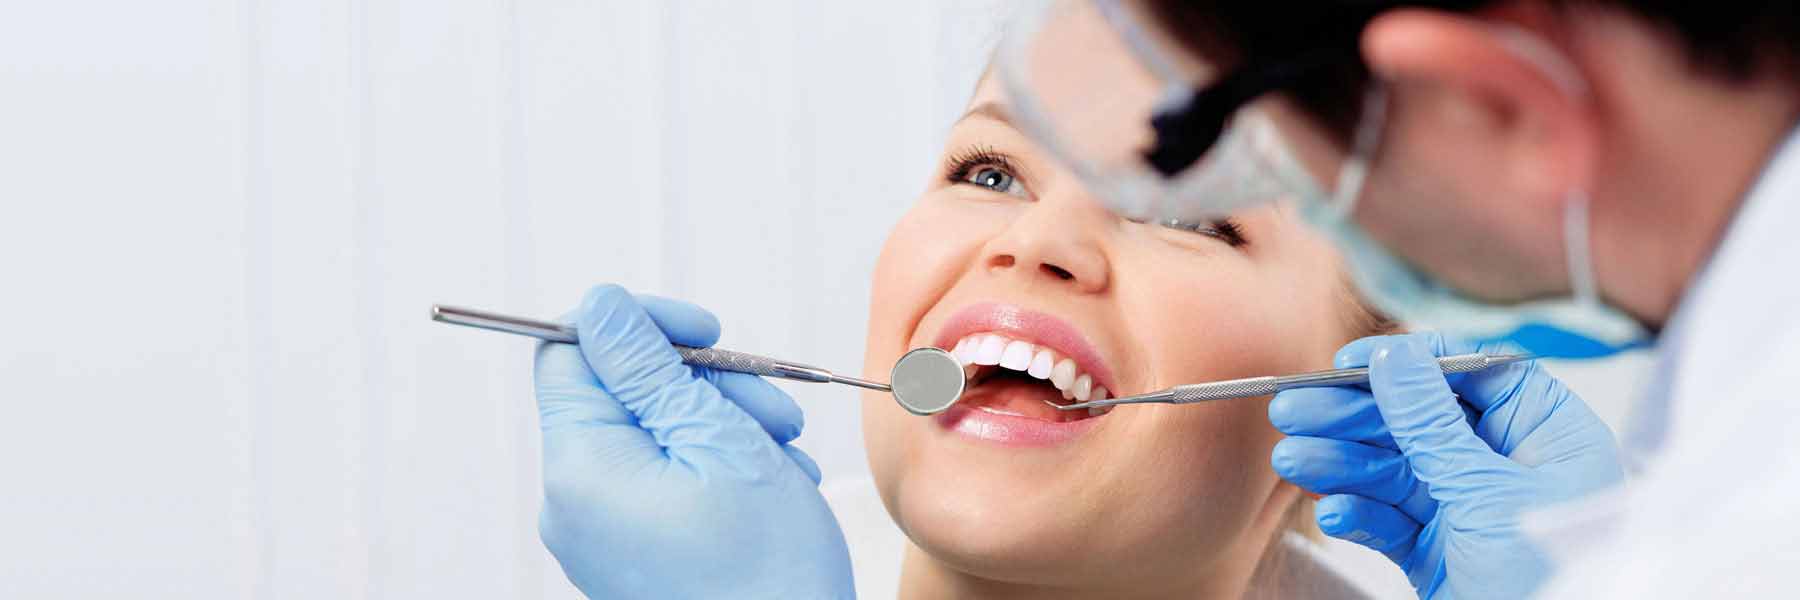 Dental Service in Thornton - Tooth N Care